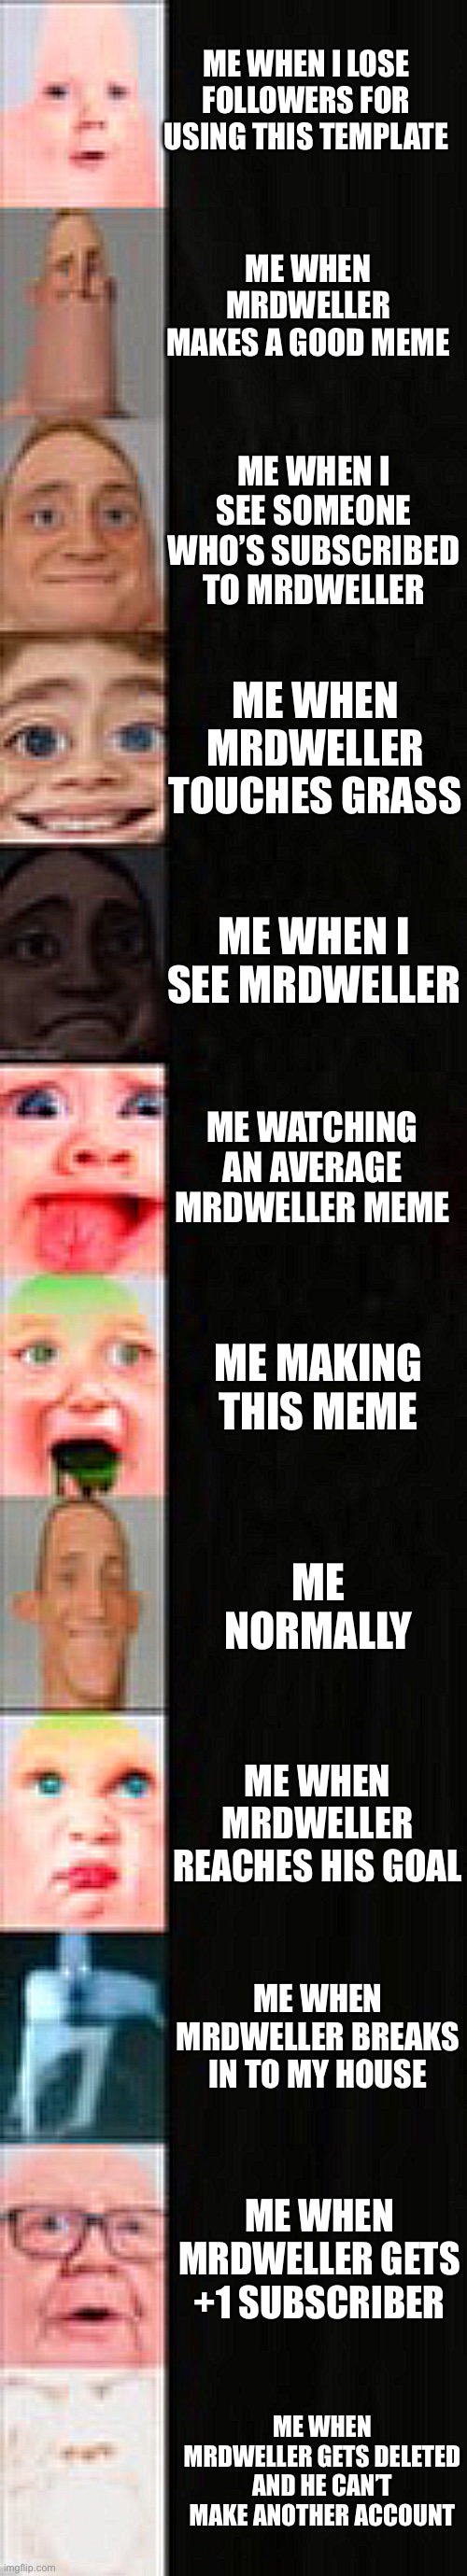 Don’t destroy me for using a mrdweller template | ME WHEN I LOSE FOLLOWERS FOR USING THIS TEMPLATE; ME WHEN MRDWELLER MAKES A GOOD MEME; ME WHEN I SEE SOMEONE WHO’S SUBSCRIBED TO MRDWELLER; ME WHEN MRDWELLER TOUCHES GRASS; ME WHEN I SEE MRDWELLER; ME WATCHING AN AVERAGE MRDWELLER MEME; ME MAKING THIS MEME; ME NORMALLY; ME WHEN MRDWELLER REACHES HIS GOAL; ME WHEN MRDWELLER BREAKS IN TO MY HOUSE; ME WHEN MRDWELLER GETS +1 SUBSCRIBER; ME WHEN MRDWELLER GETS DELETED AND HE CAN’T MAKE ANOTHER ACCOUNT | image tagged in mrdweller realistic template,memes,mrdweller,mrdweller sucks | made w/ Imgflip meme maker